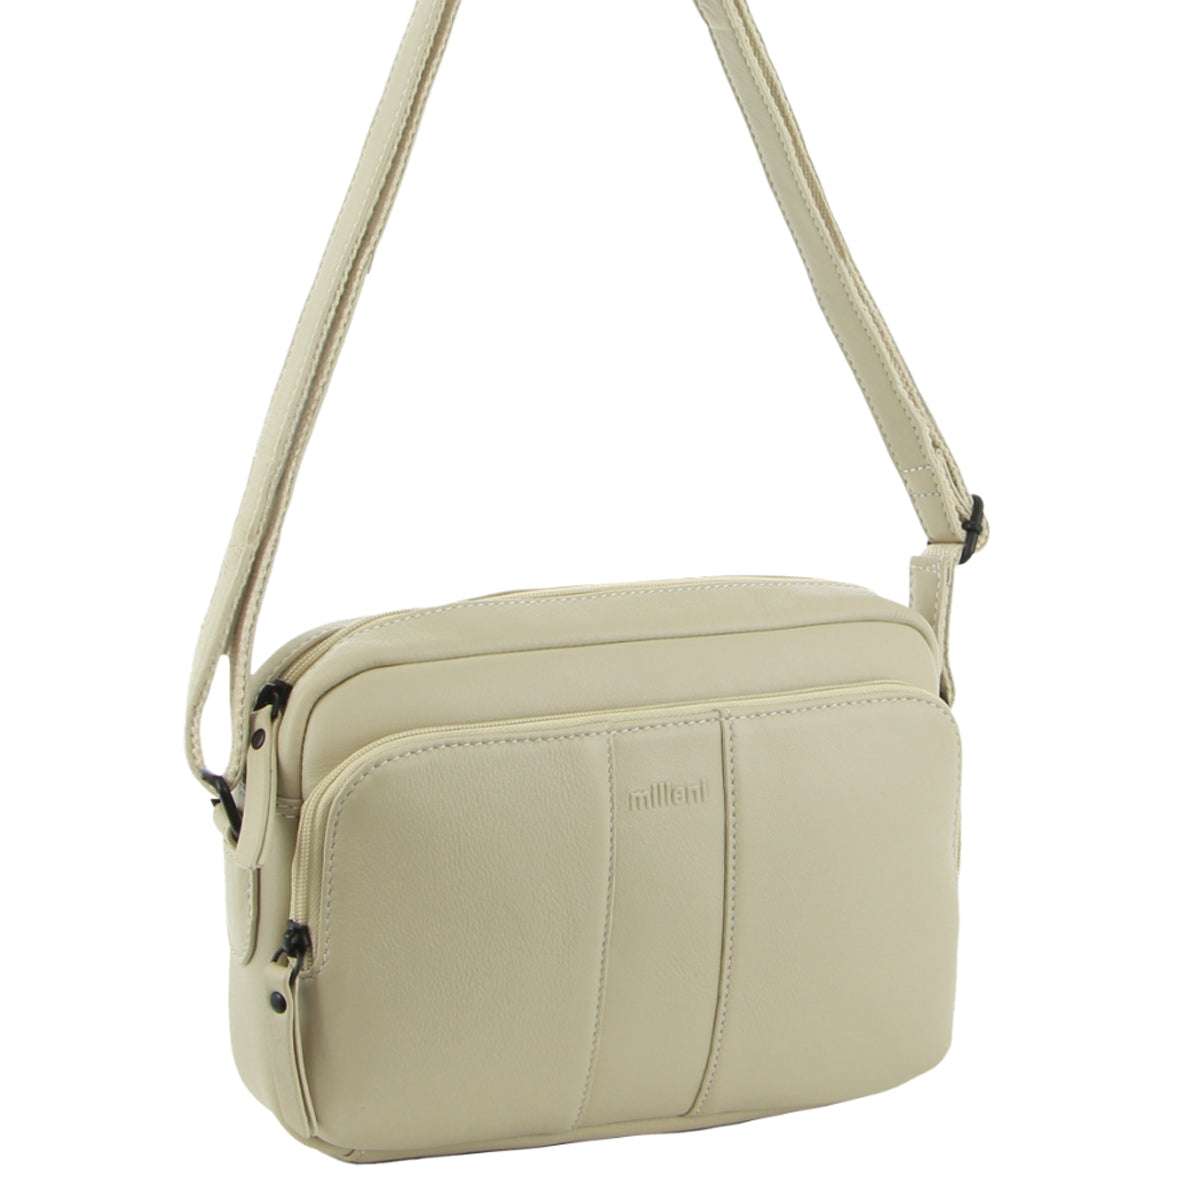 Milleni - NL3871 Small leather sidebag - Cement-3